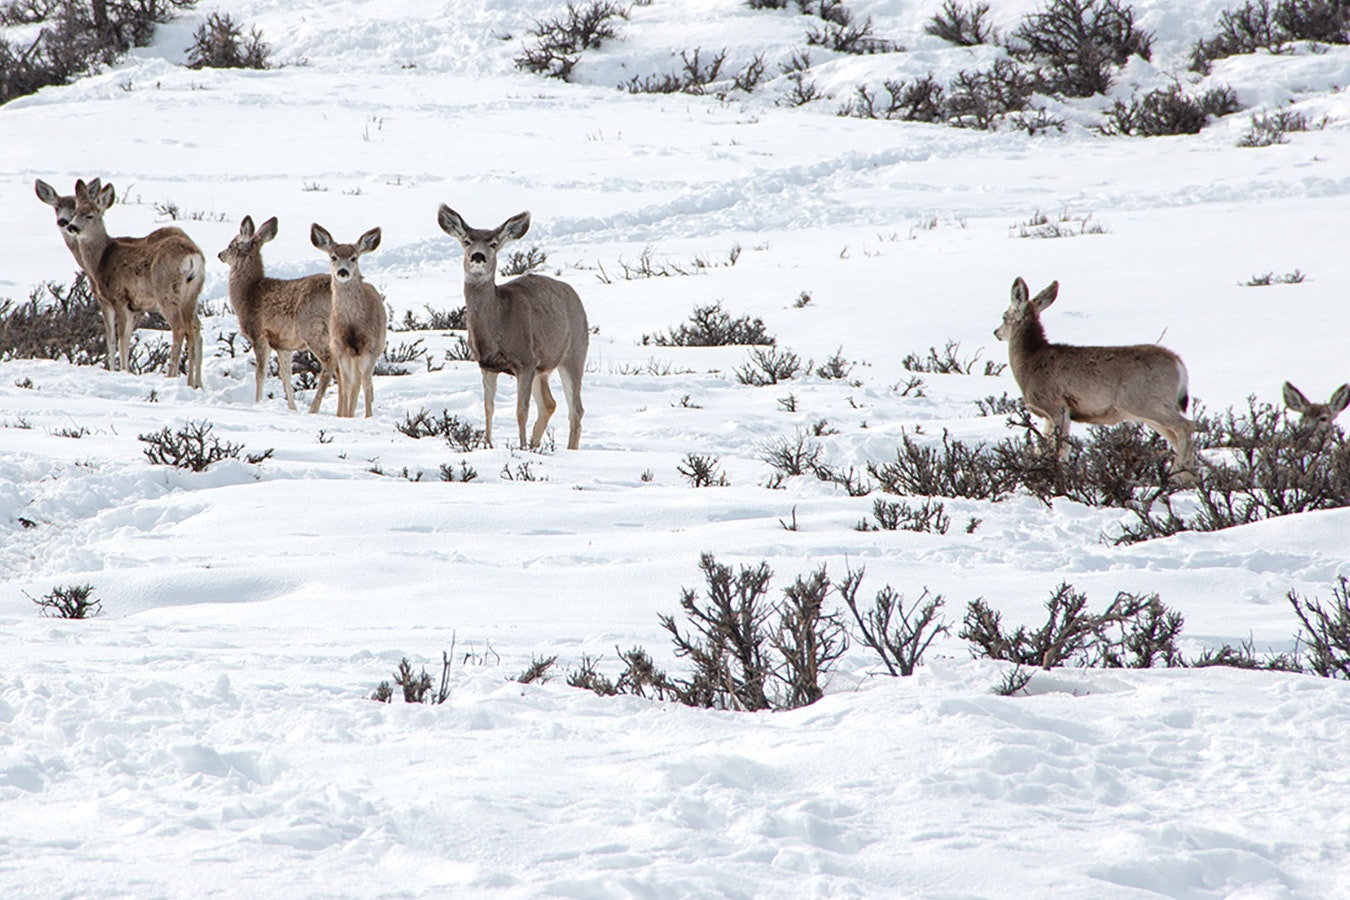 Wyoming Game and Fish Department said it's difficult deciding when, or if, to feed deer during the winter.